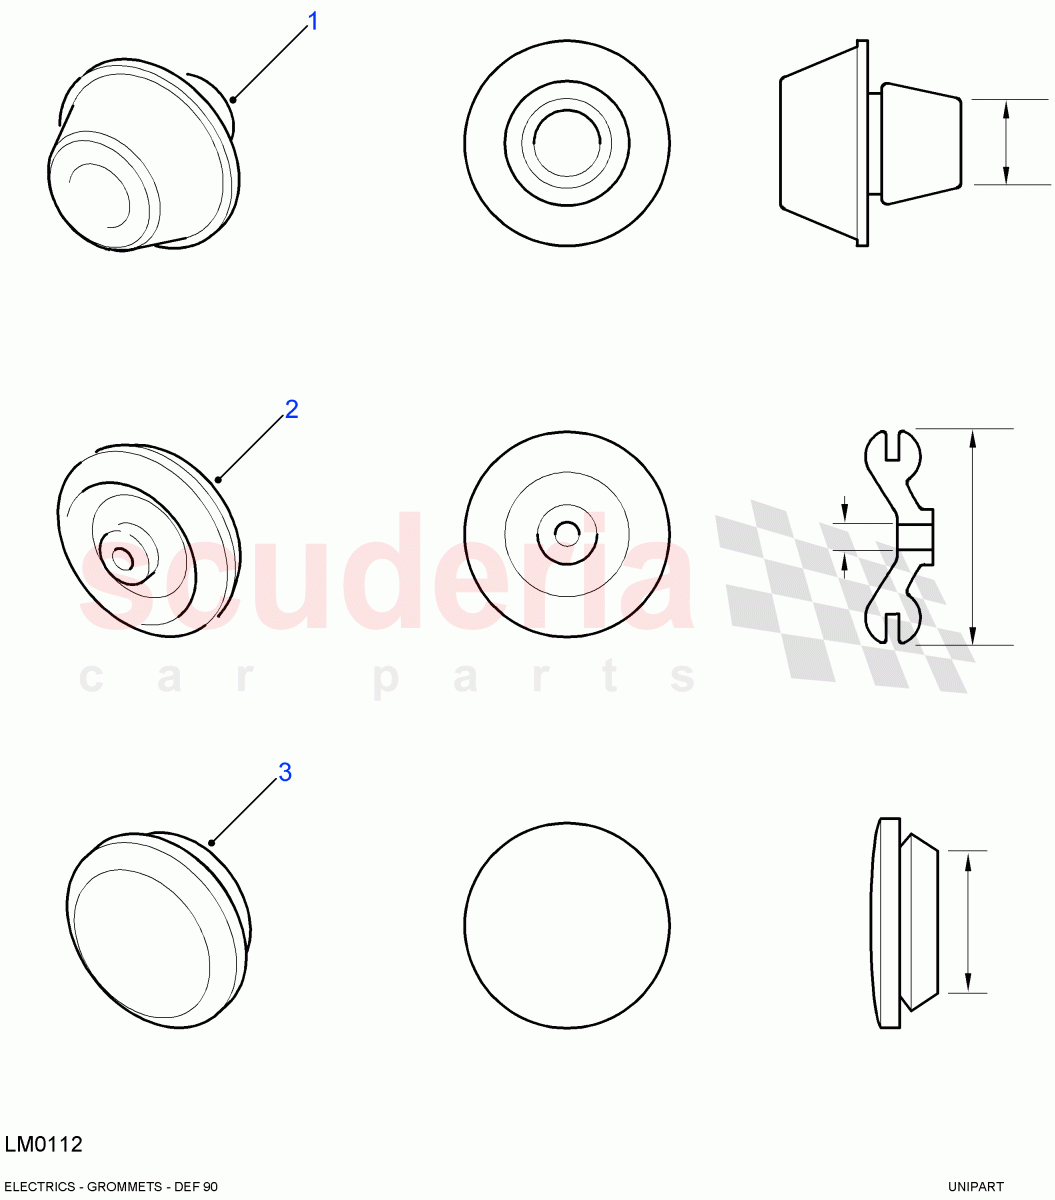 Grommets((V)FROM7A000001) of Land Rover Land Rover Defender (2007-2016)